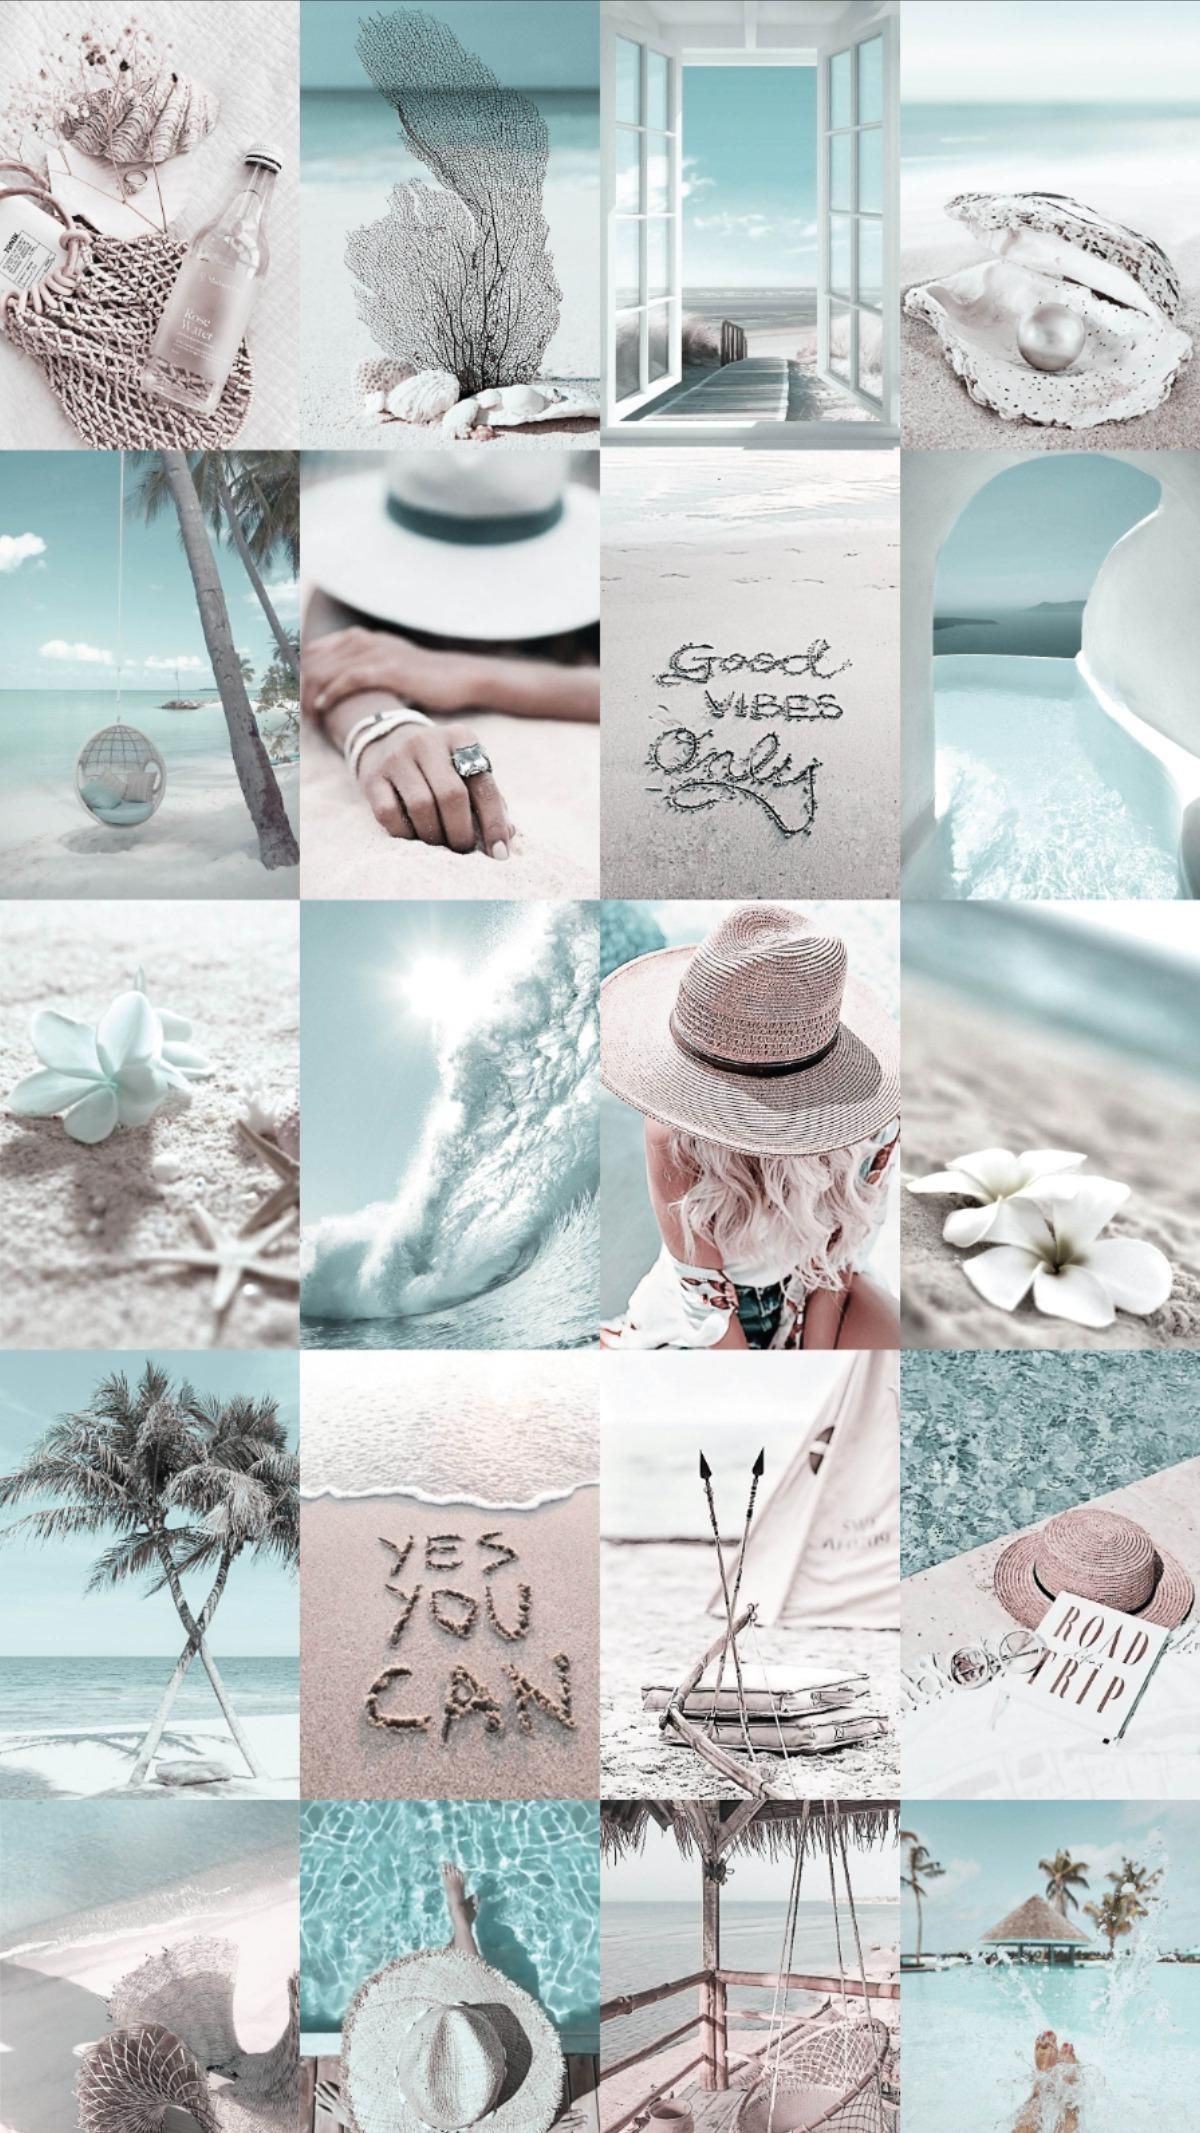 Spice up your room with this boho beach aesthetic photo wall collage!. iPhone wallpaper themes, Wallpaper iphone boho, Pretty wallpaper